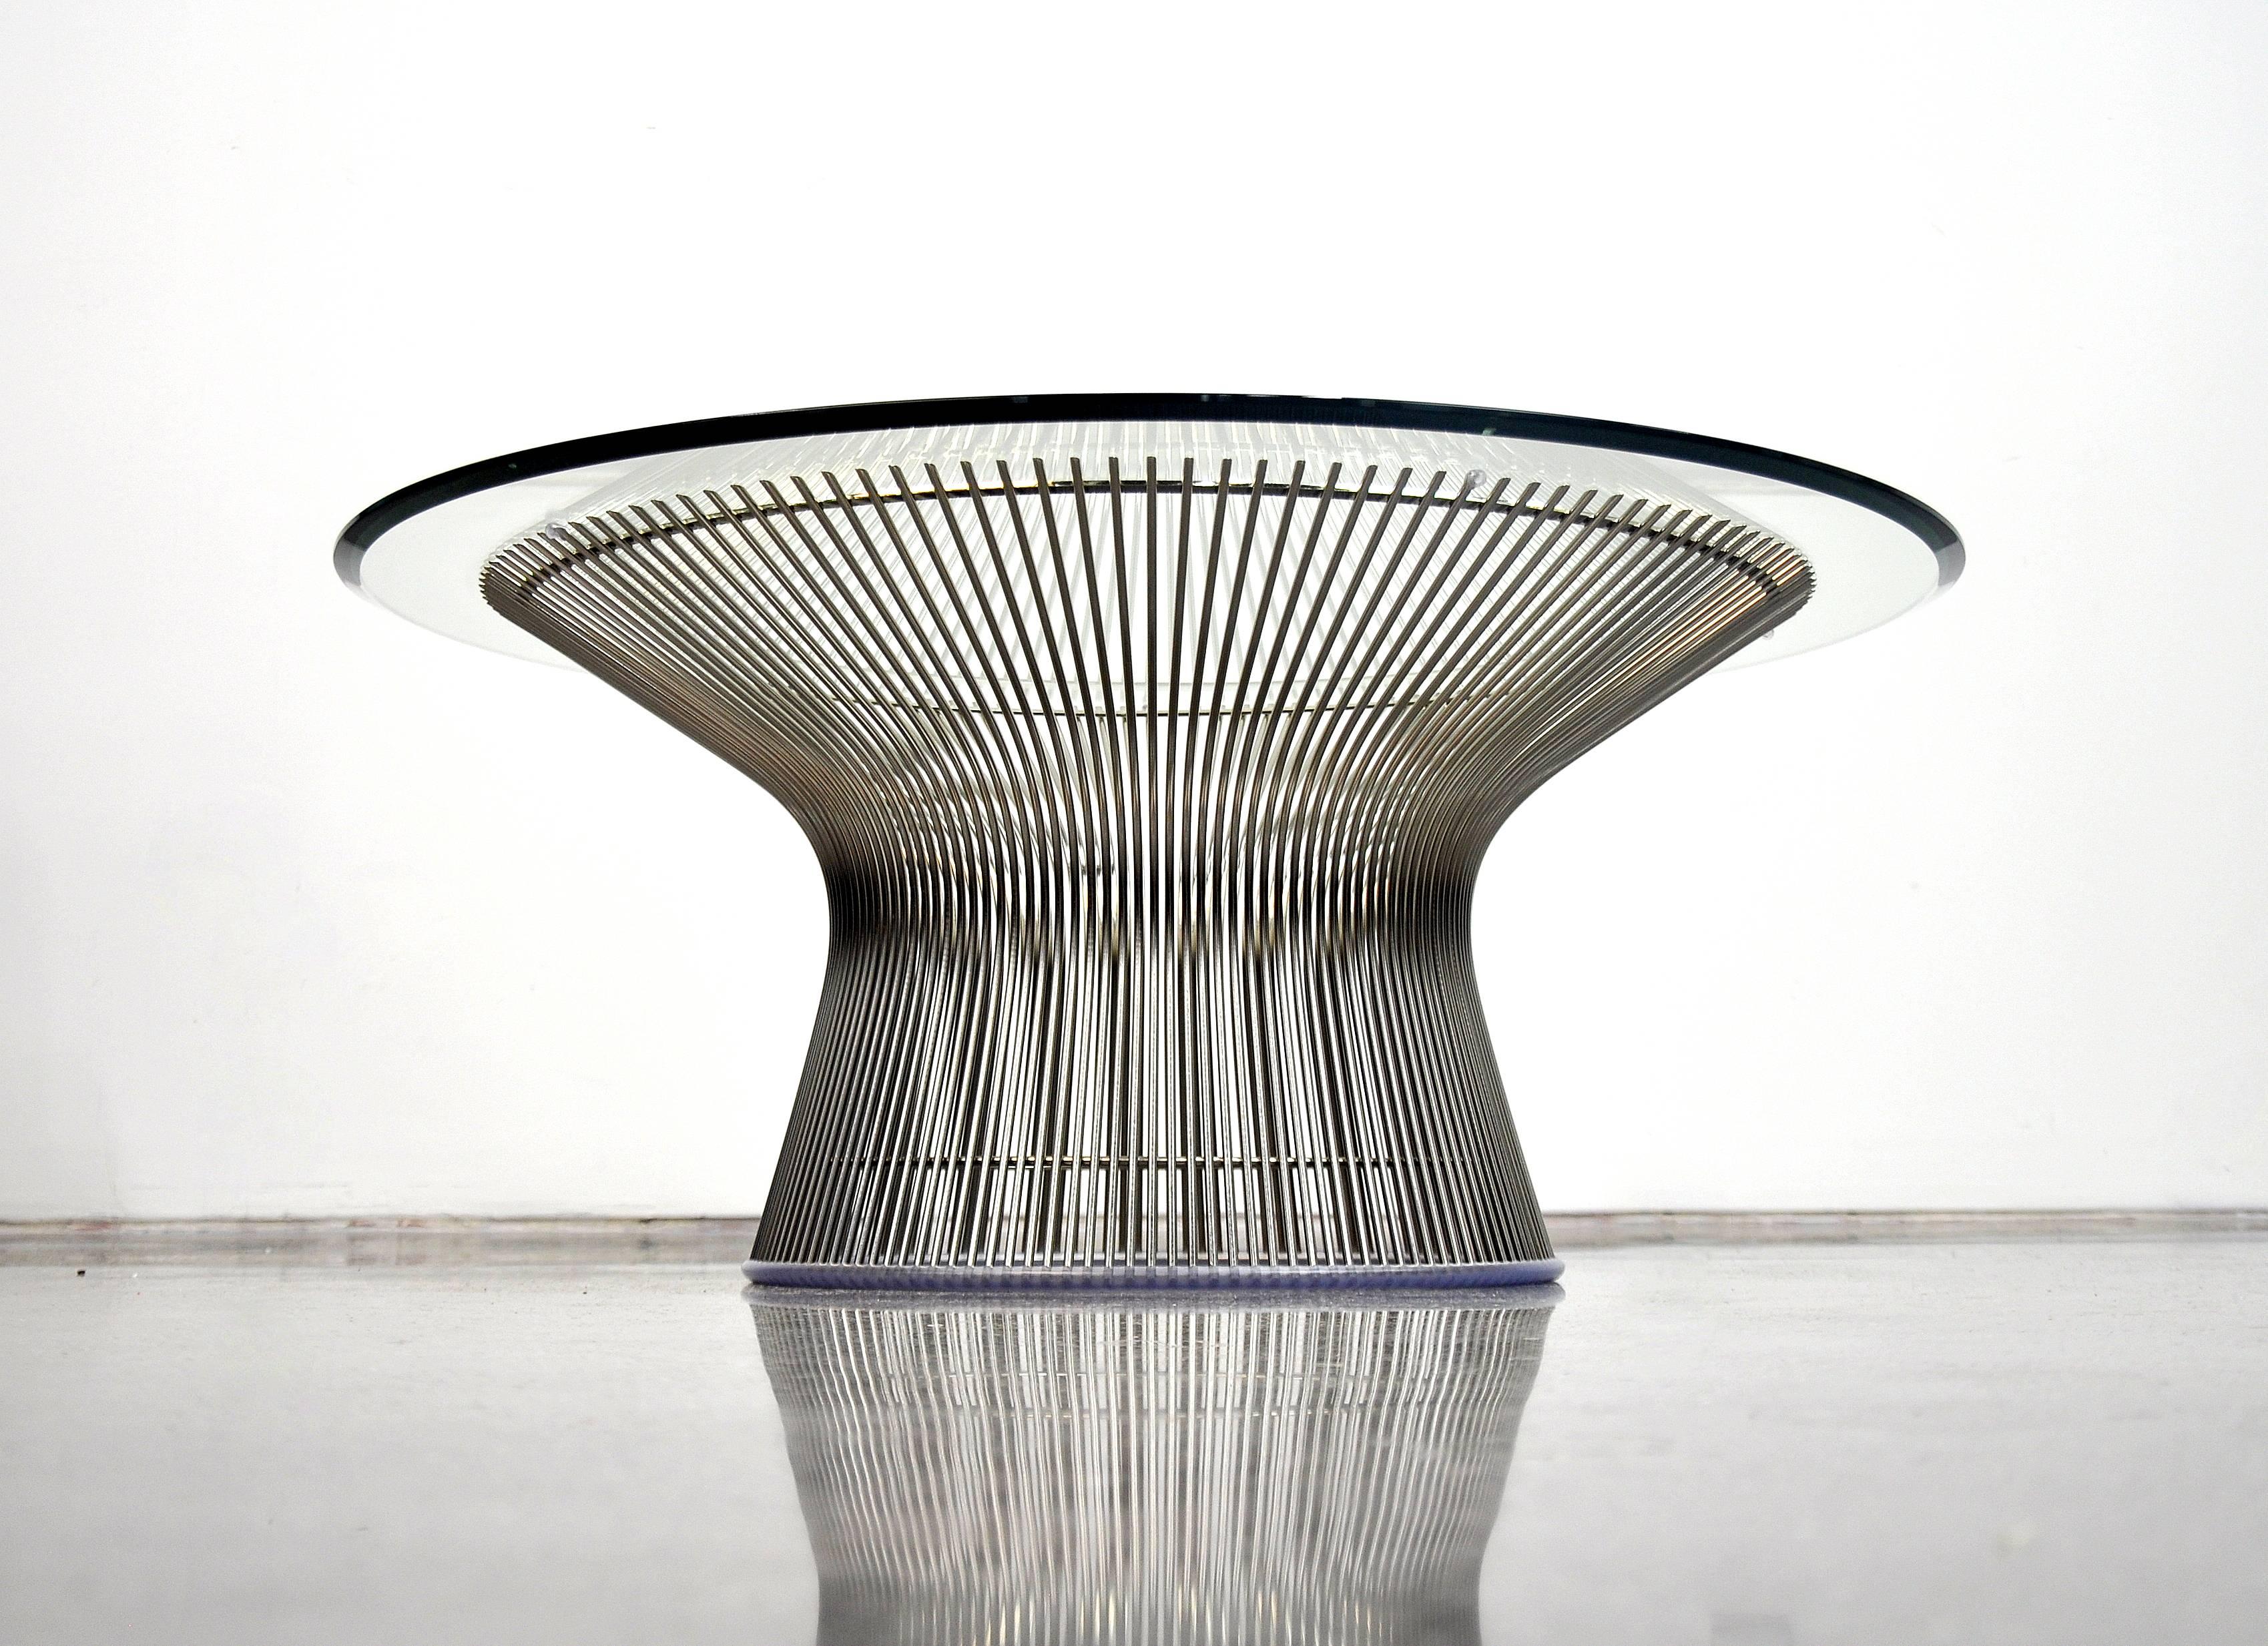 Iconic Mid-Century Modern nickel-plated steel cocktail table. Originally designed in 1966, Warren Platner's collection is timeless. Very decorative yet Minimalist and graceful, the table features curved steel rods welded to circular frames,